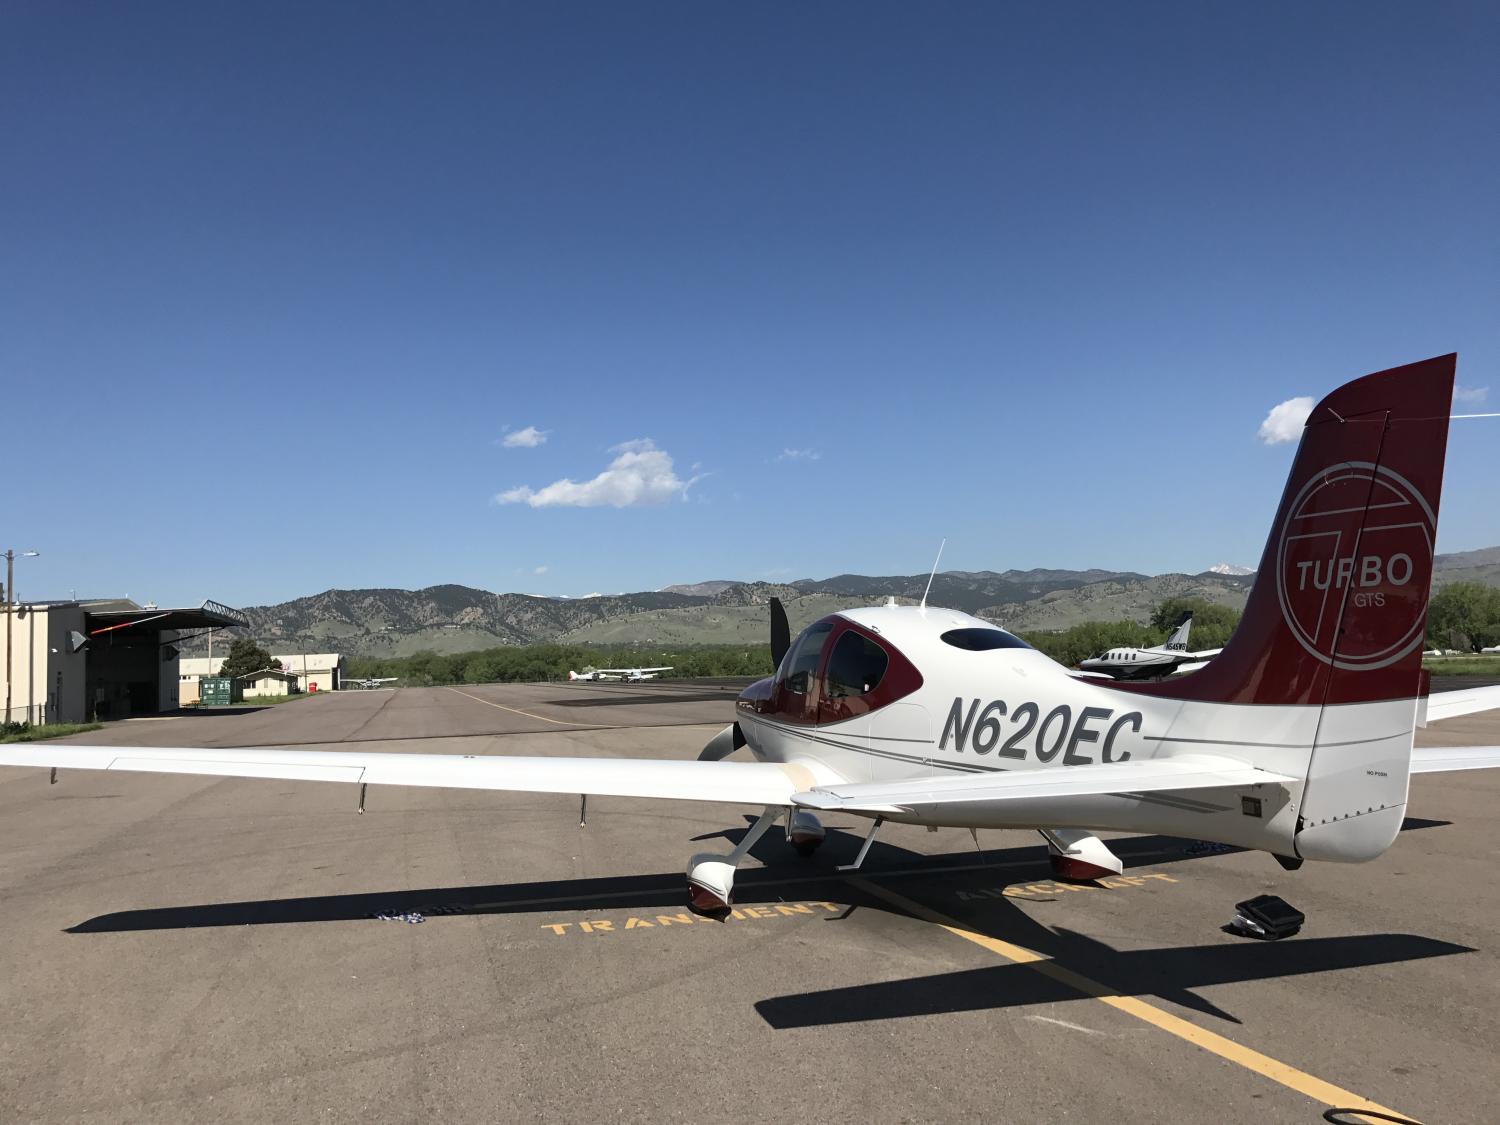 Small single-propellor plane on the tarmac of Boulder’s municipal airport